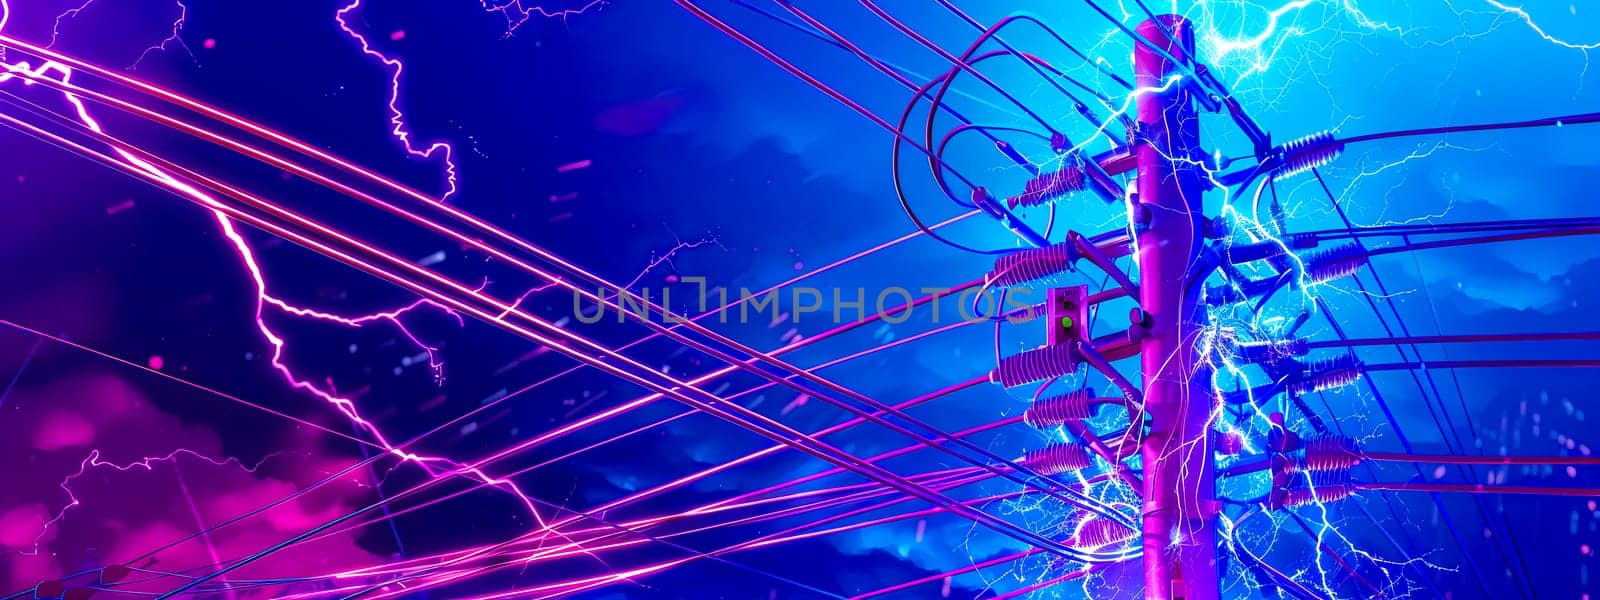 Electric Power Lines with Dynamic Lightning Strikes by Edophoto